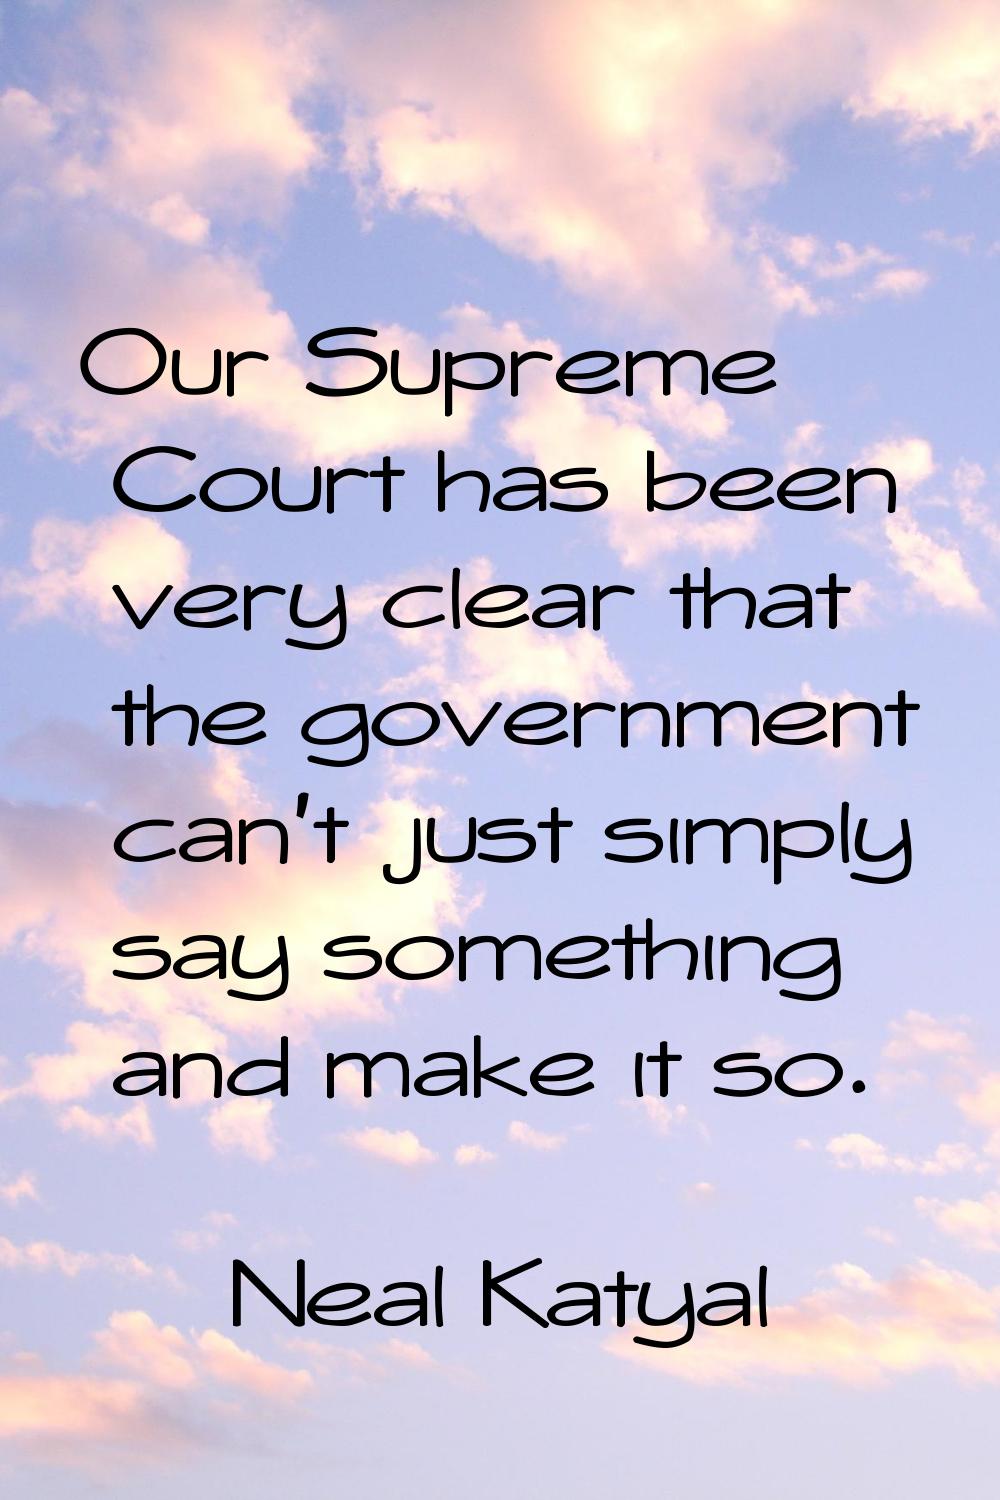 Our Supreme Court has been very clear that the government can't just simply say something and make 